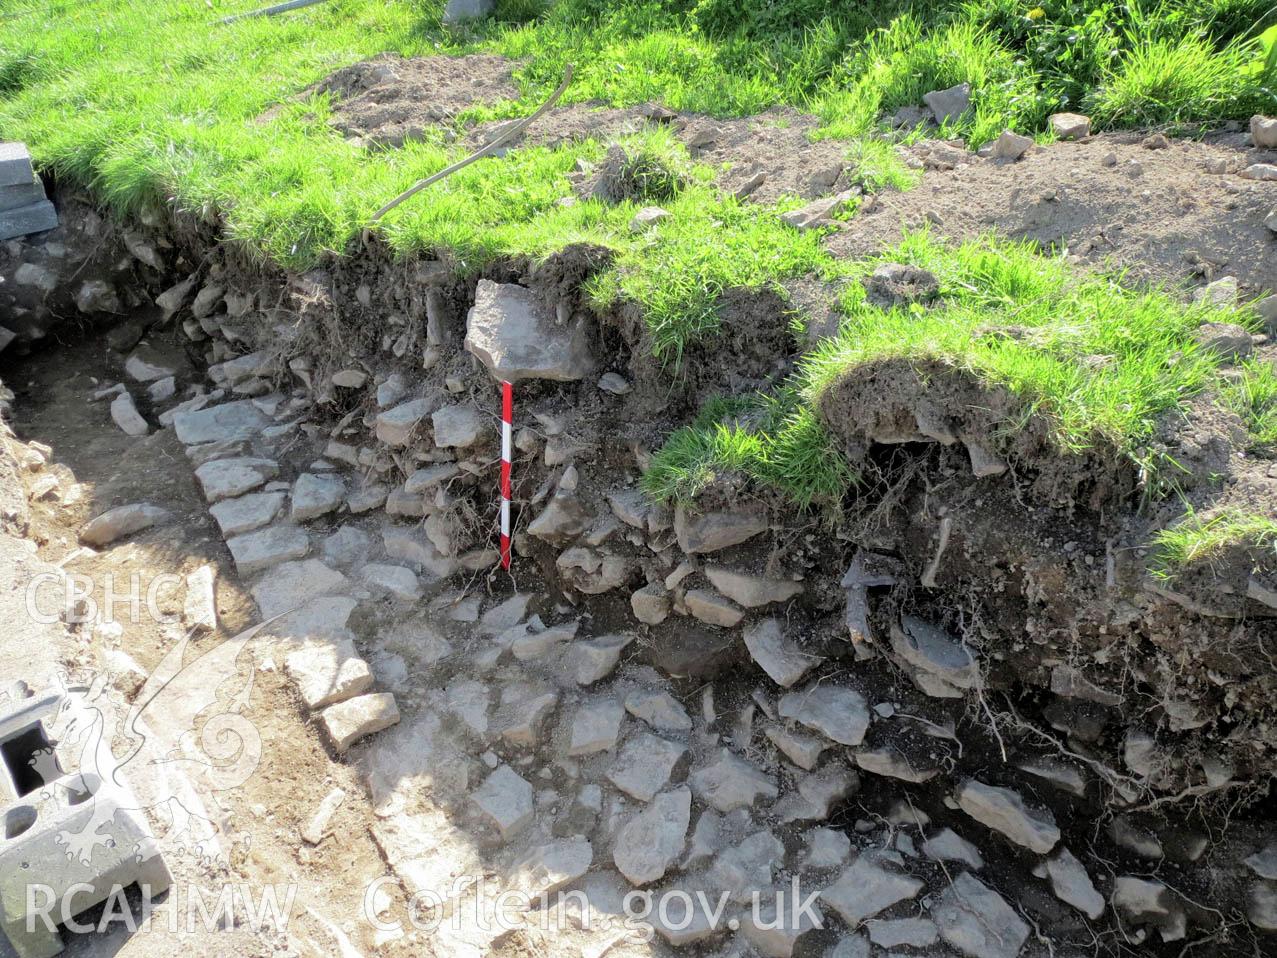 'Oblique view of Sample Section 3, showing stone rubble above in situ foundations. Scales 1x0.5m. Looking South-South-West.' Photographed as part of Archaeological Watching Brief of Upper House Farm, Painscastle, by Archaeology Wales.